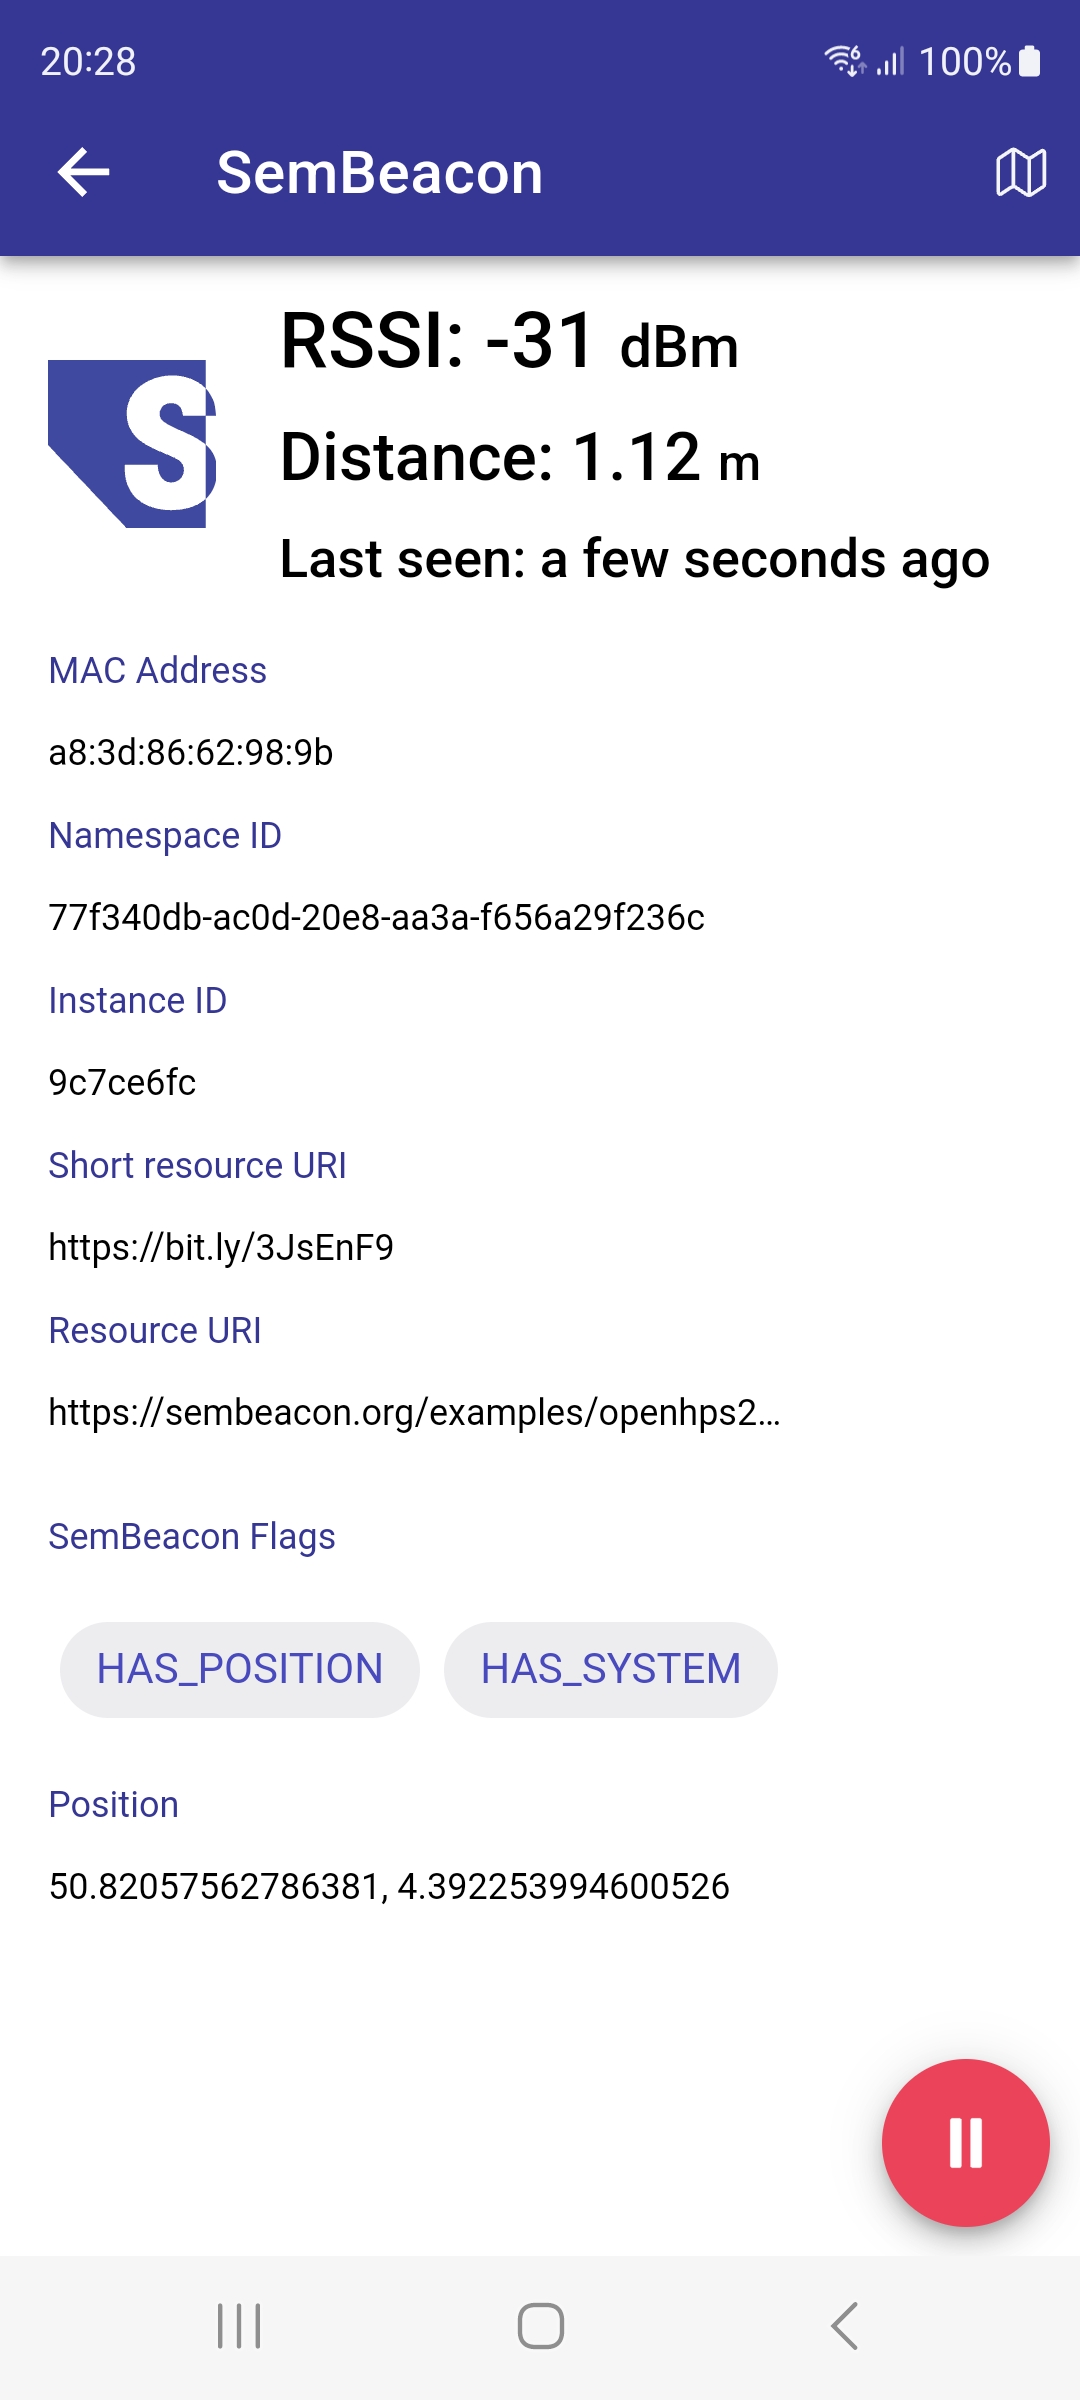 Screenshot for SemBeacon android app showing details of detected SemBeacon